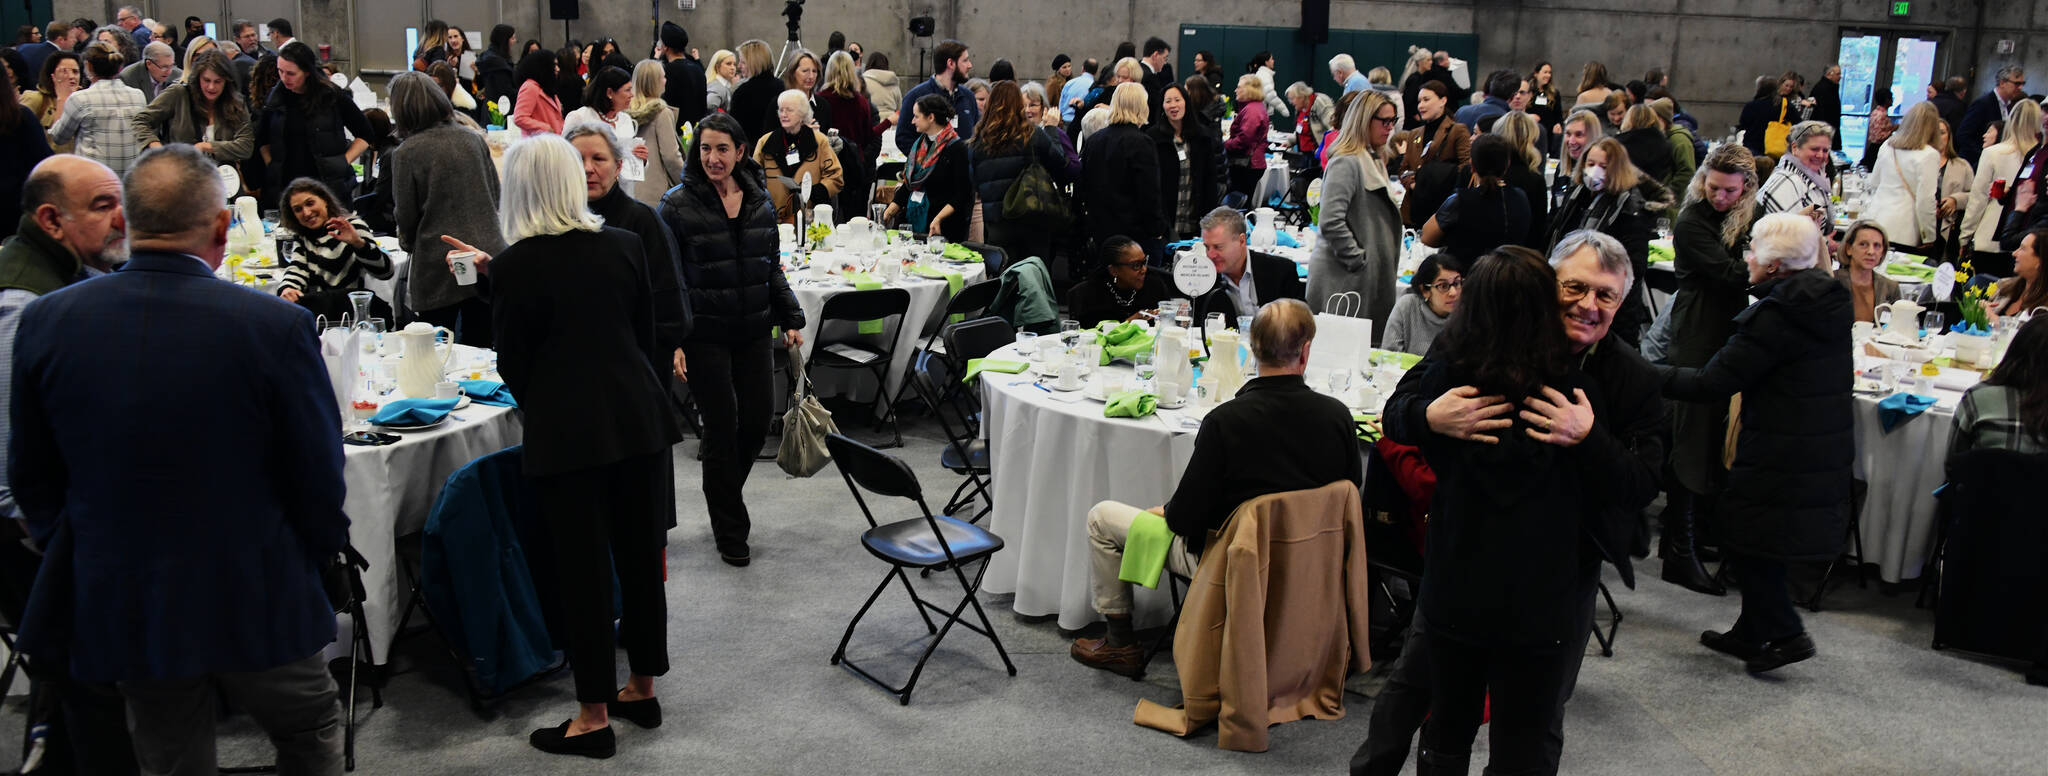 With an attendance of nearly 500 people strong, the Mercer Island Youth and Family Services (MIYFS) Foundation presented its 21st annual fundraising breakfast last Feb. 8 in the Mercer Island Community and Event Center gymnasium. Andy Nystrom/ staff photo